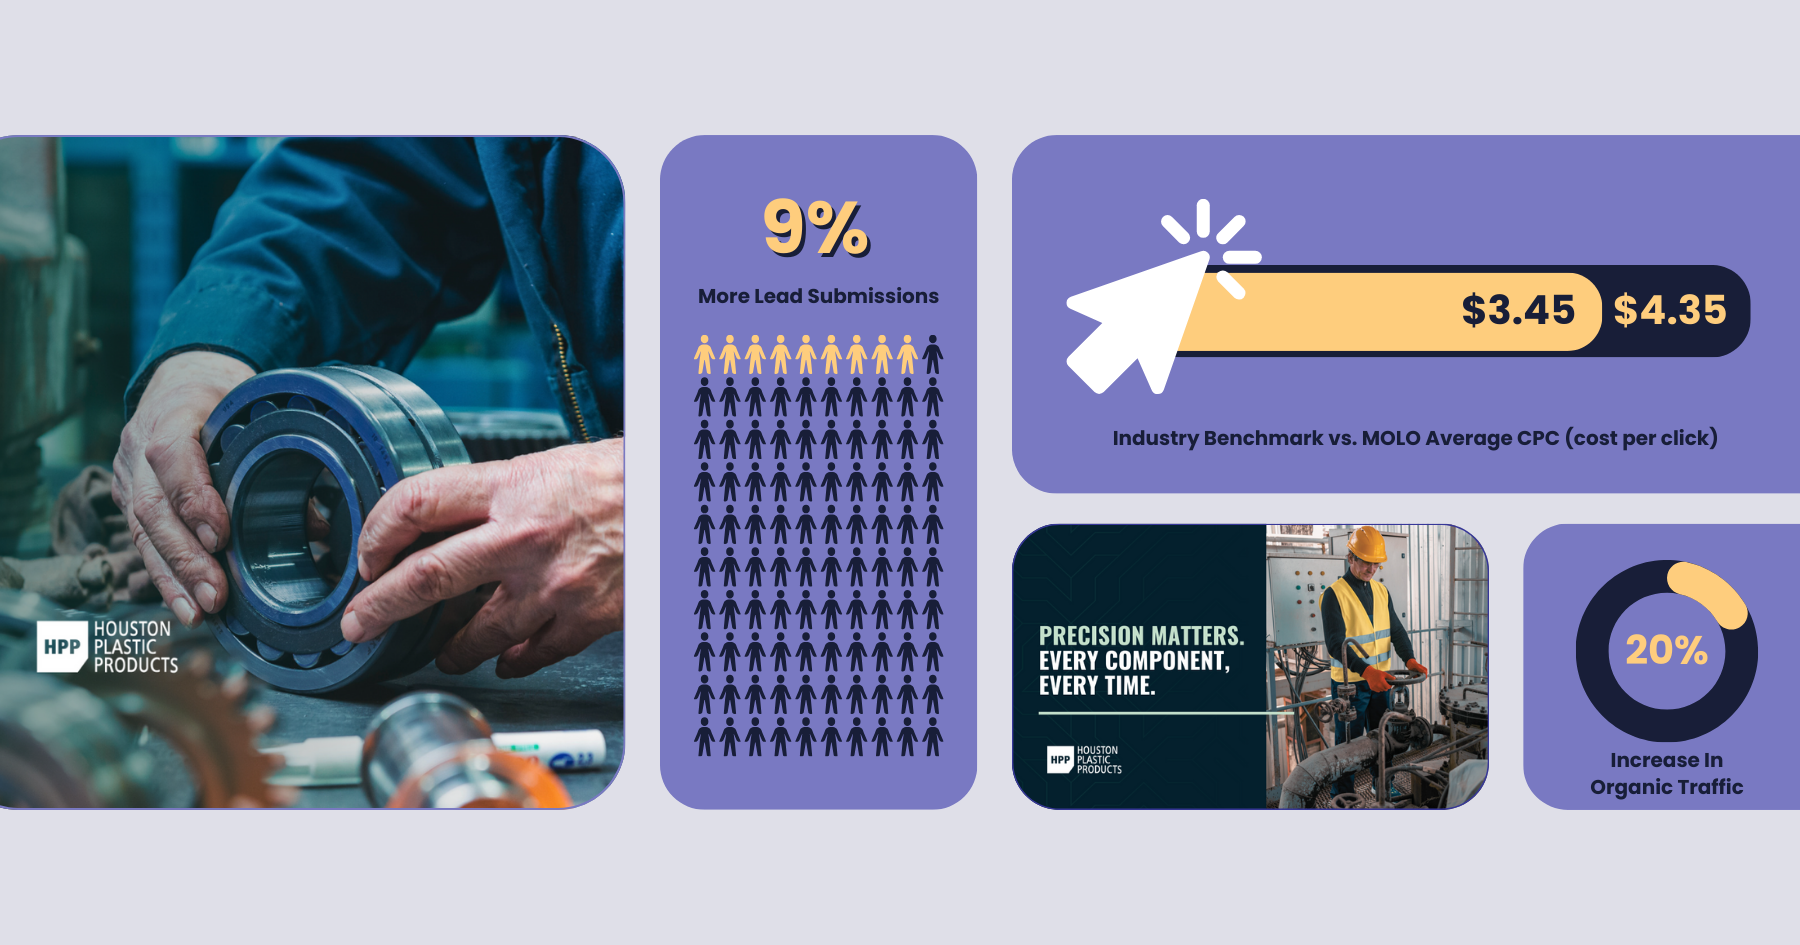 Graphic showcasing Houston Plastic Products case study results, including 9% more lead submissions, cost per click savings with MOLO's average at $3.45 versus industry benchmark at $4.35, and a 20% increase in organic traffic. Features images of industrial work and data charts.